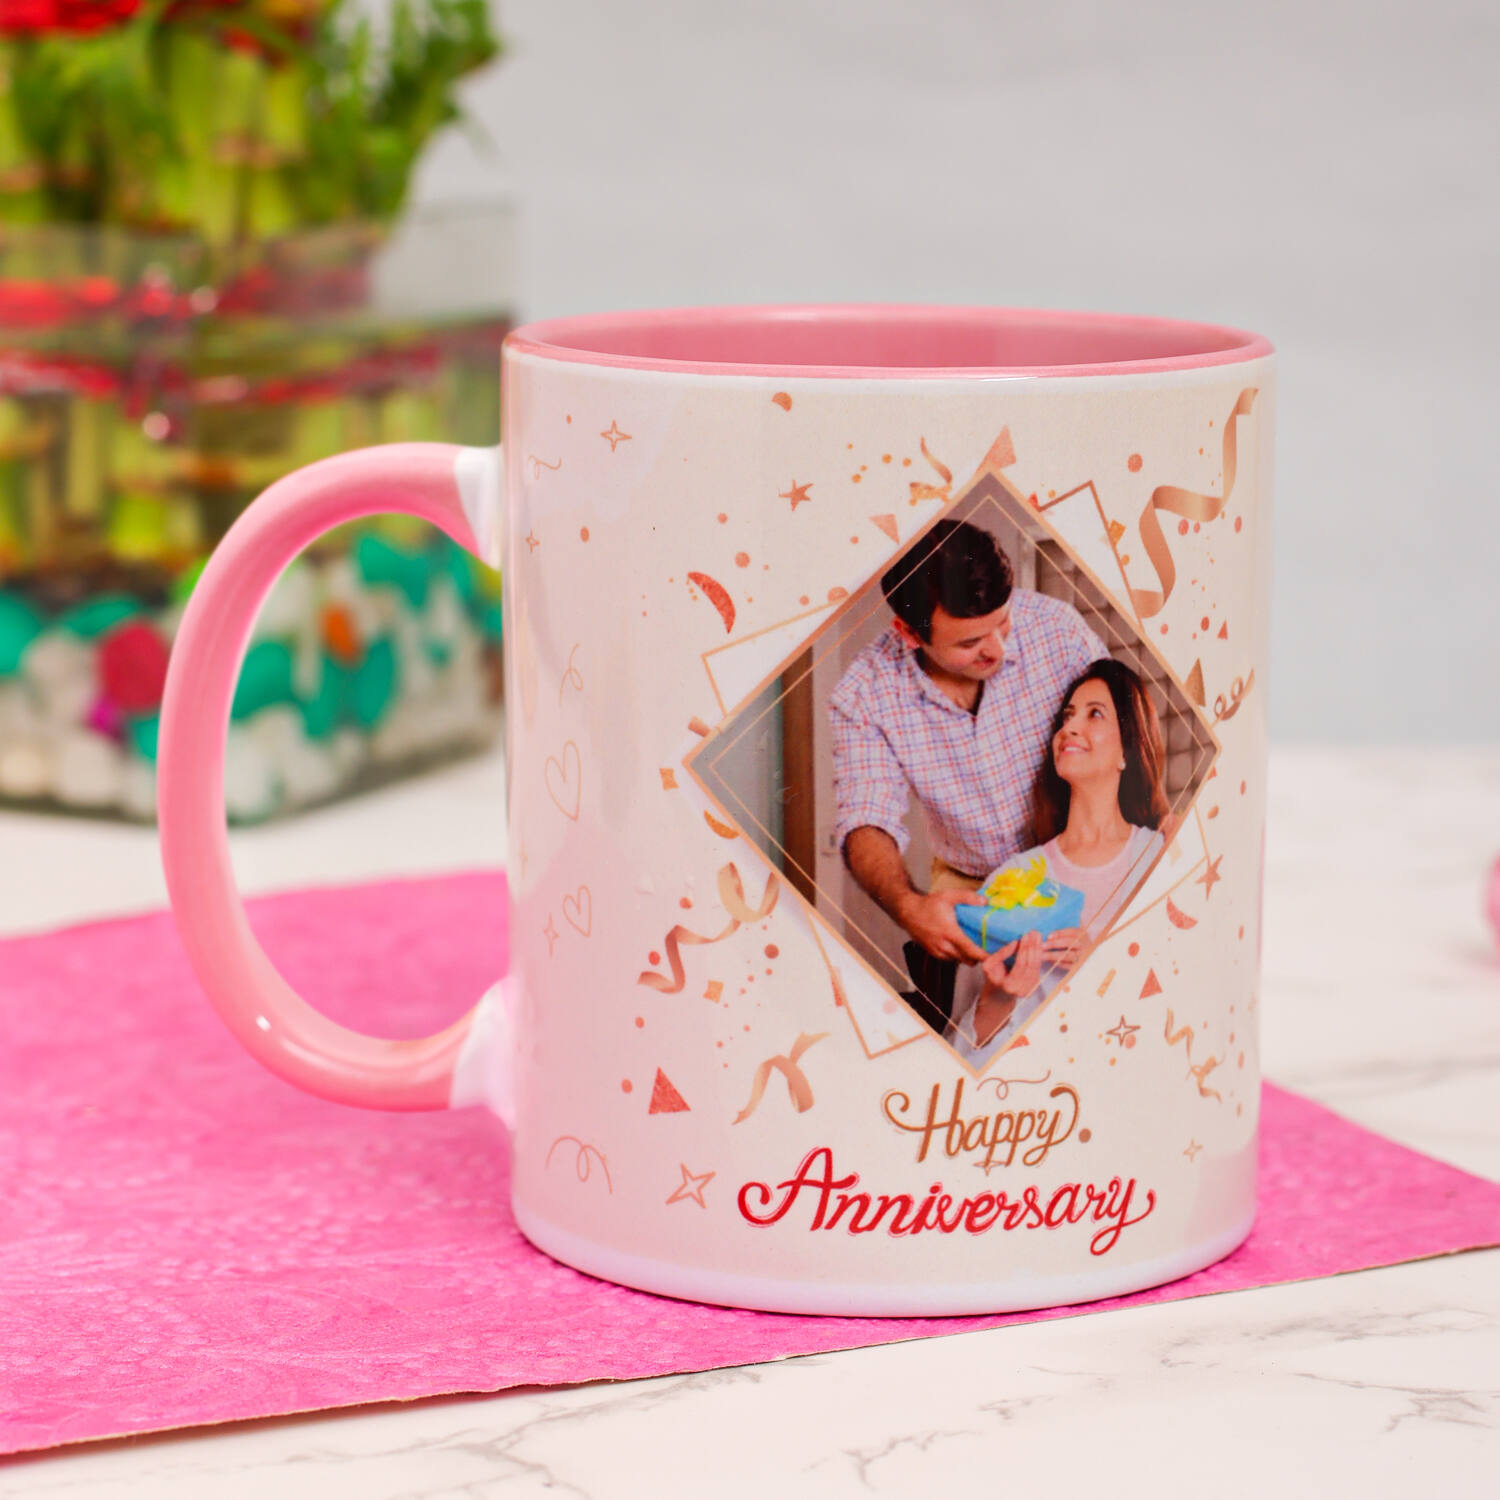 Best Gift For Anniversary Husband  No1 Online Gifts Ideas